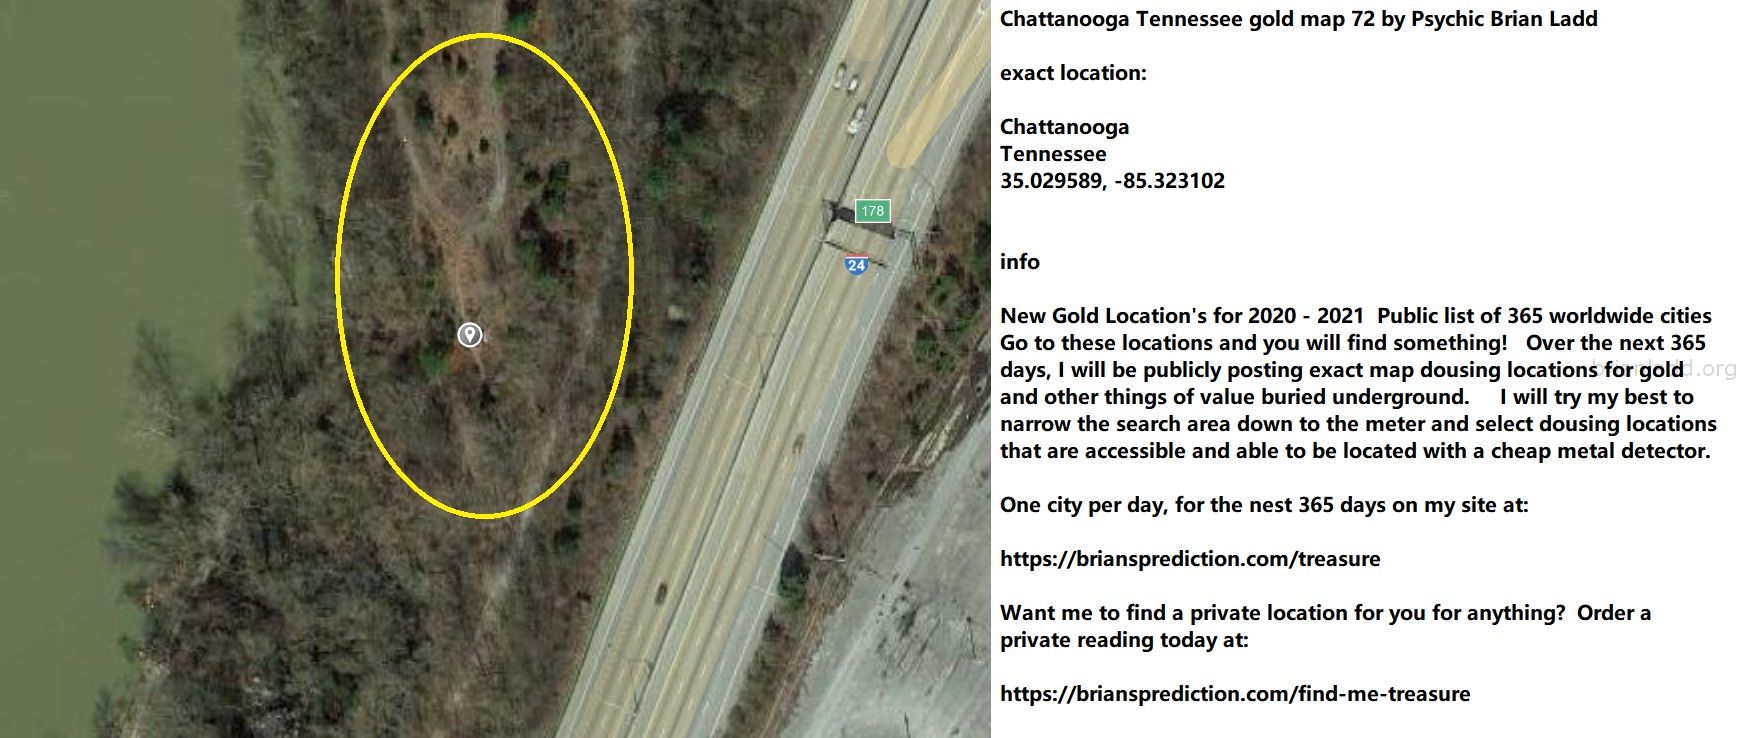 Chattanooga Tennessee Gold Map 72 By Psychic Brian Ladd - Chattanooga Tennessee Gold Map 72 By Psychic Brian Ladd  Exact...
Chattanooga Tennessee Gold Map 72 By Psychic Brian Ladd  Exact Location:  Chattanooga  Tennessee  35.029589, -85.323102  Info  New Gold Location'S For 2020 - 2021  Public List Of 365 Worldwide Cities  Go To These Locations And You Will Find Something!  Over The Next 365 Days, I Will Be Publicly Posting Exact Map Dousing Locations For Gold And Other Things Of Value Buried Underground.  I Will Try My Best To Narrow The Search Area Down To The Meter And Select Dousing Locations That Are Accessible And Able To Be Located With A Cheap Metal Detector.  One City Per Day, For The Nest 365 Days On My Site At:   https://briansprediction.com/Treasure  Want Me To Find A Private Location For You For Anything?  Order A Private Reading Today At:   https://briansprediction.com/Find-Me-Treasure
